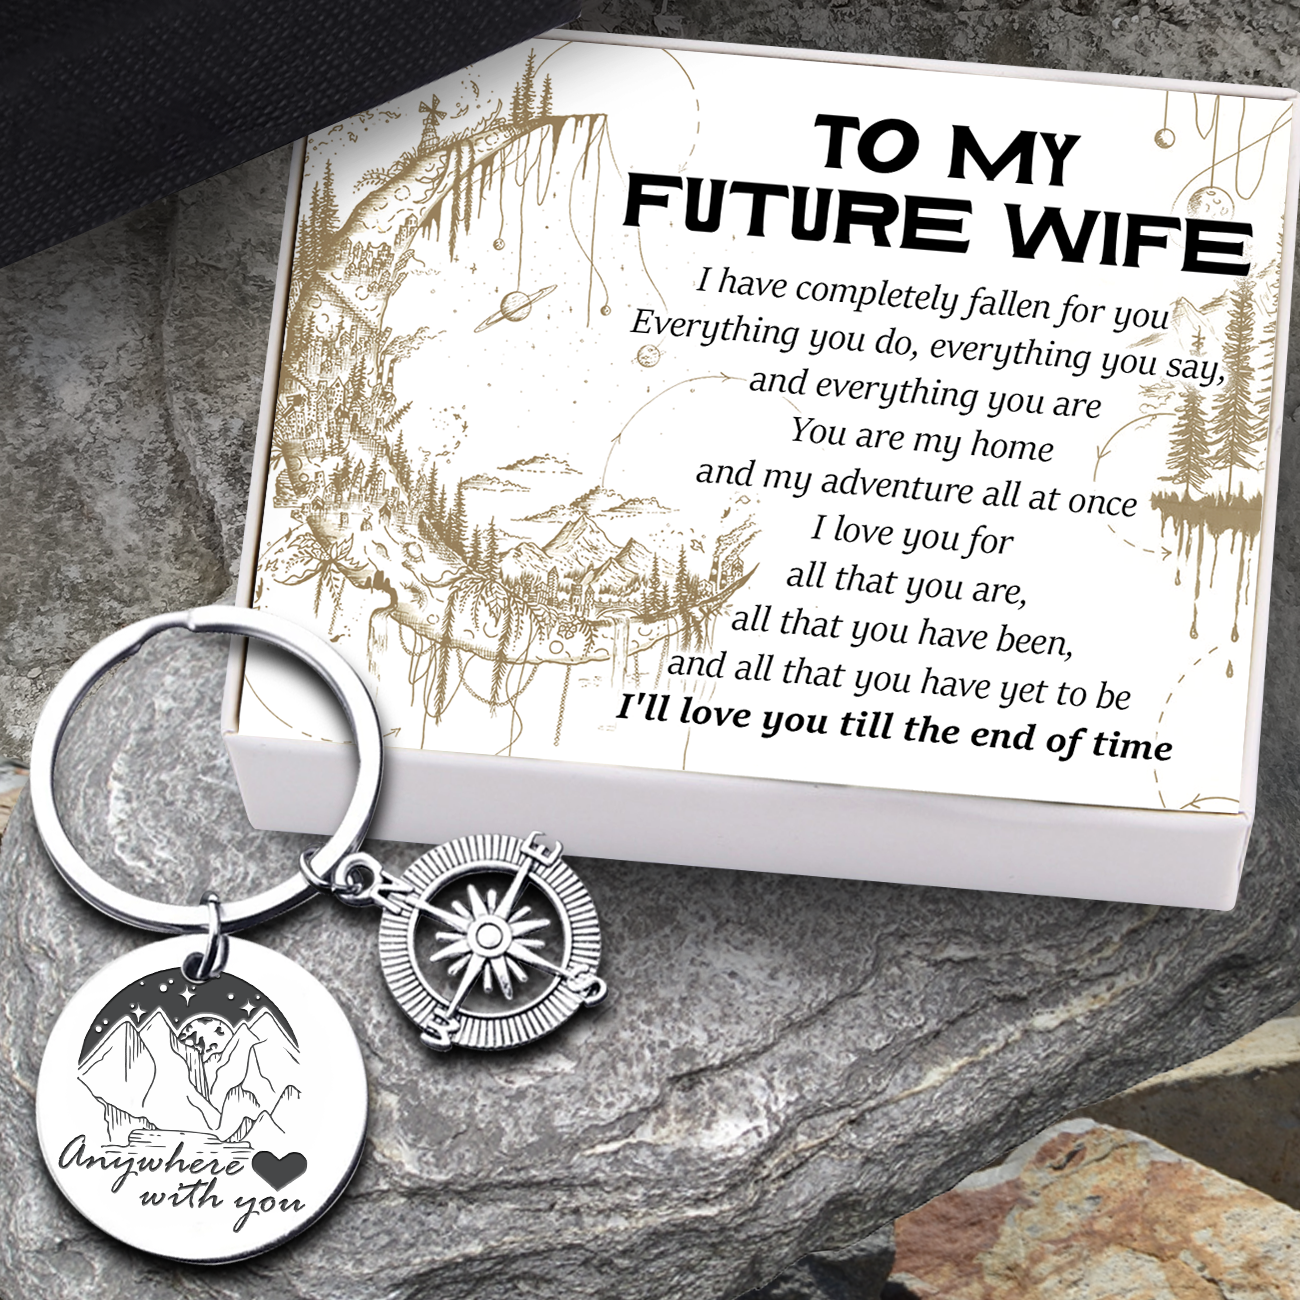 Compass Keychain - Hiking - To My Future Wife - I'll Love You Till The End Of Time - Ukgkw25001